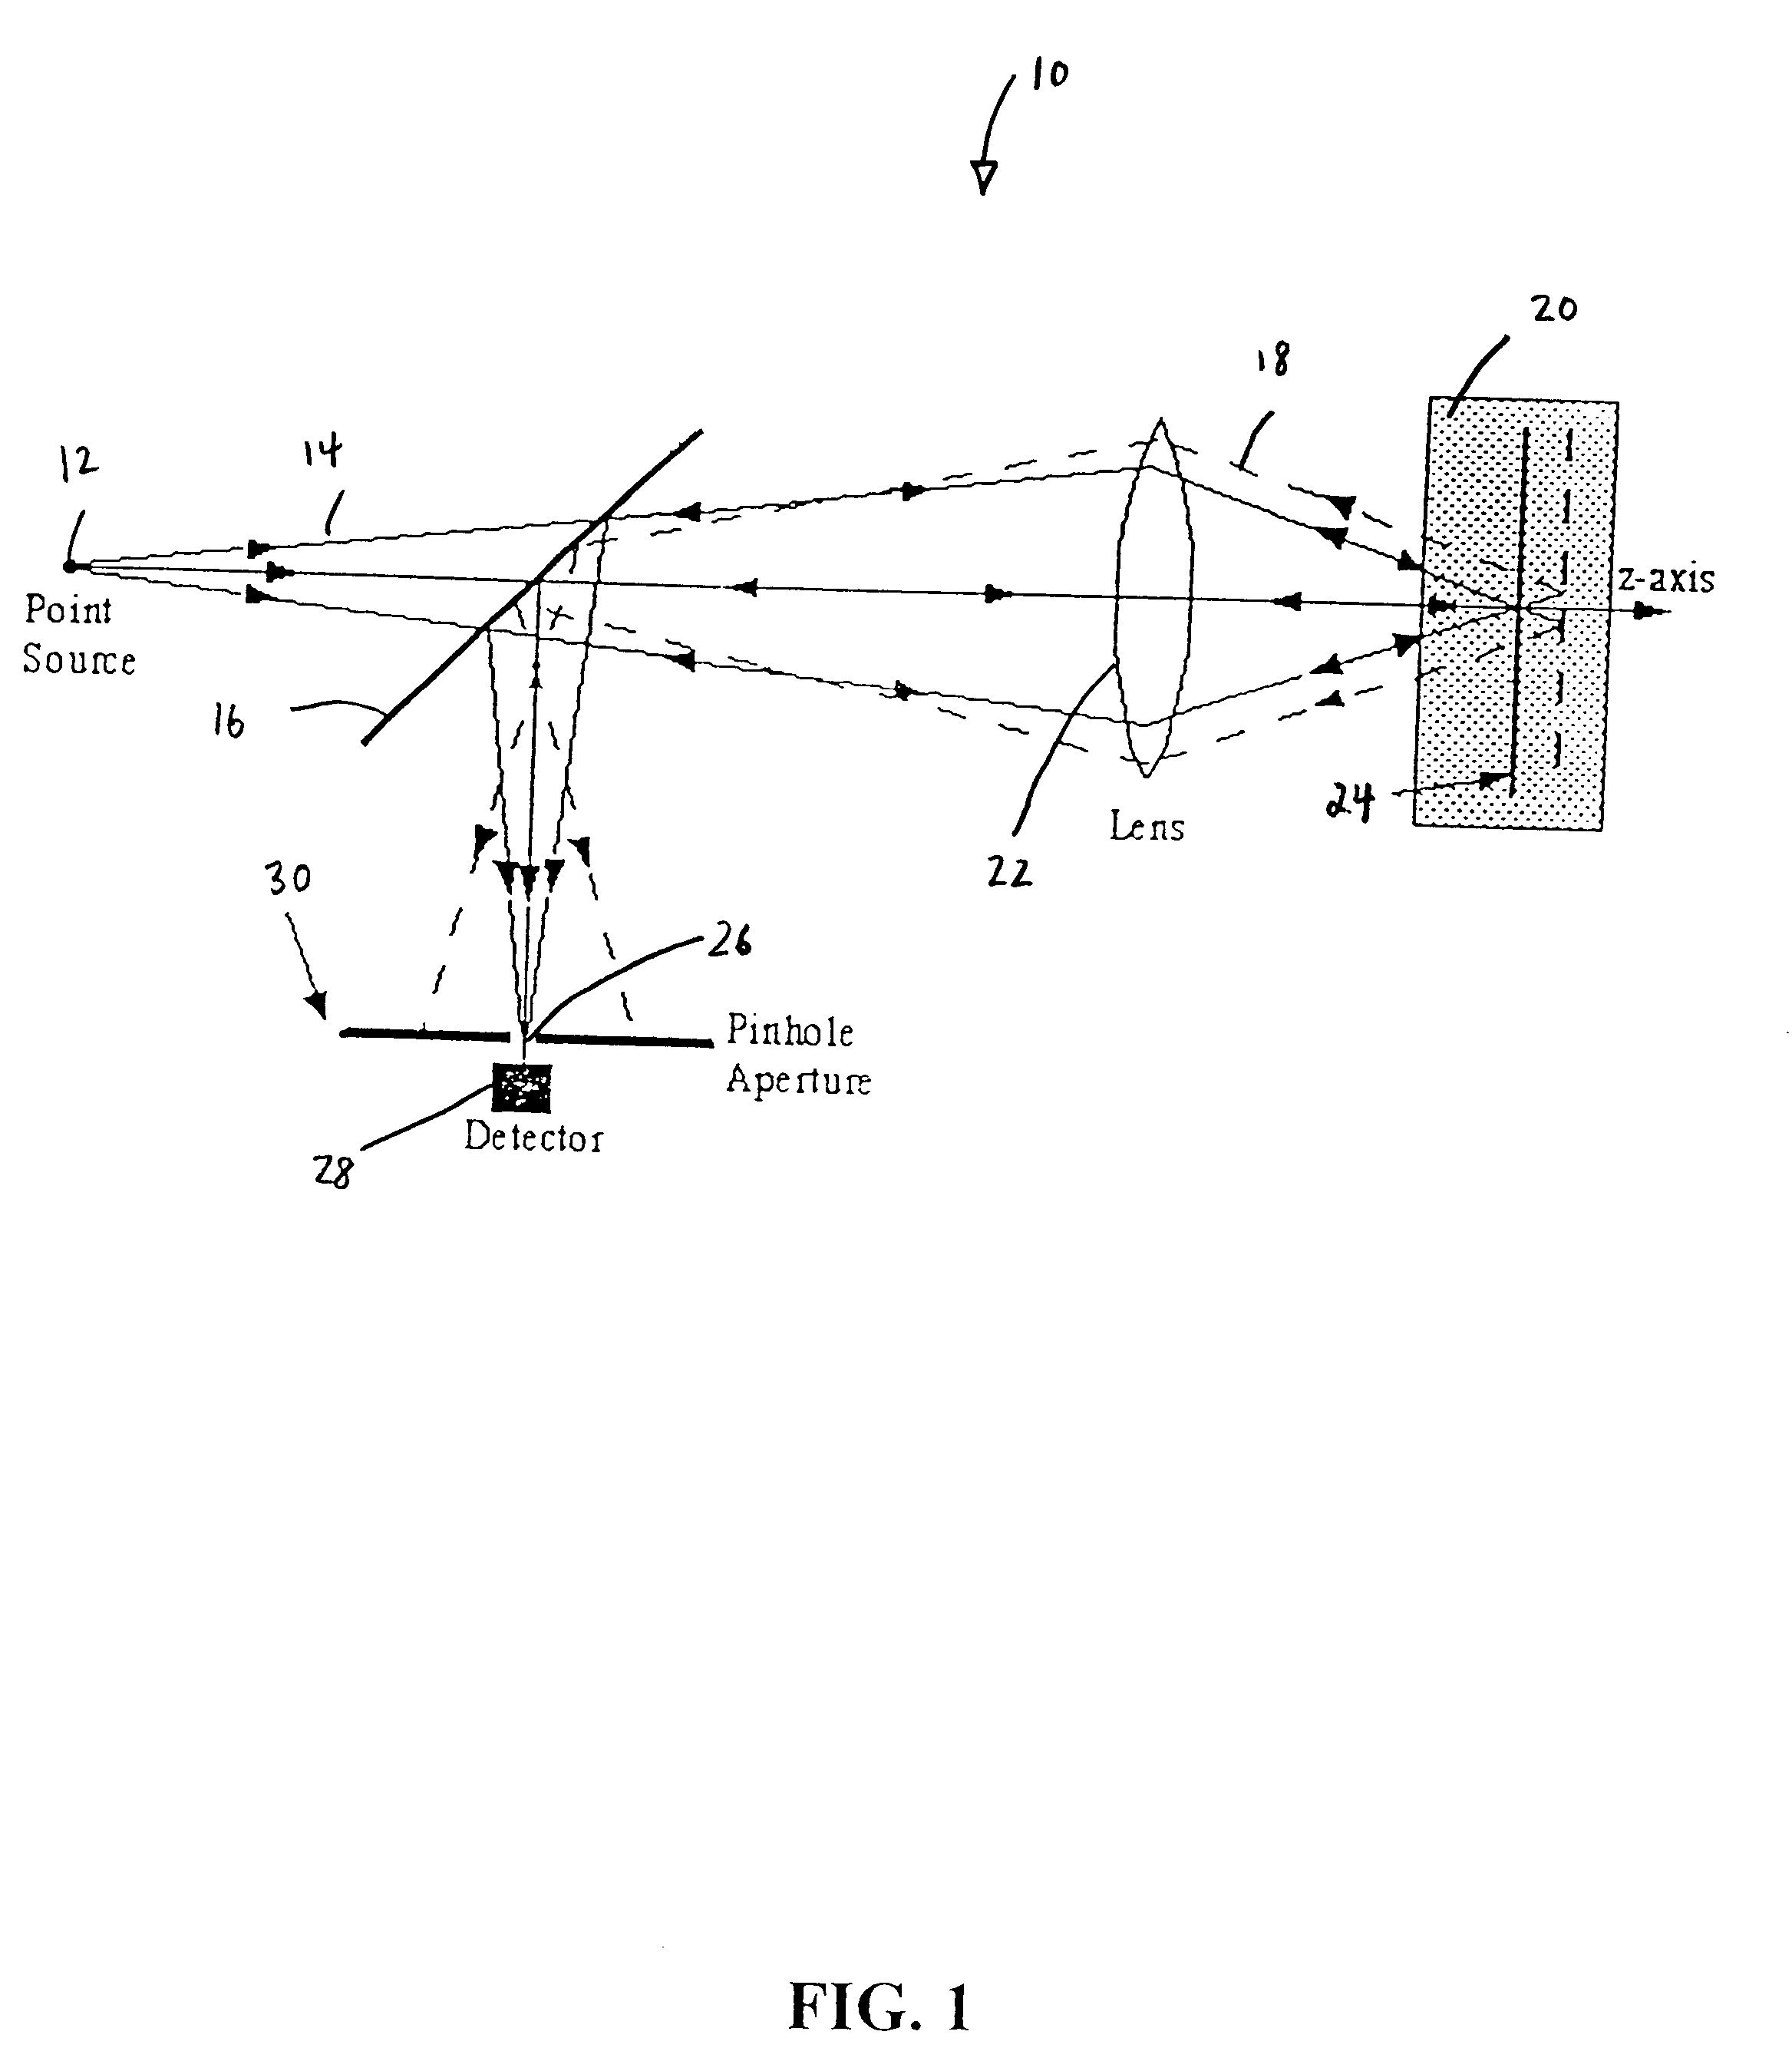 Fiber-optic confocal imaging apparatus and methods of use